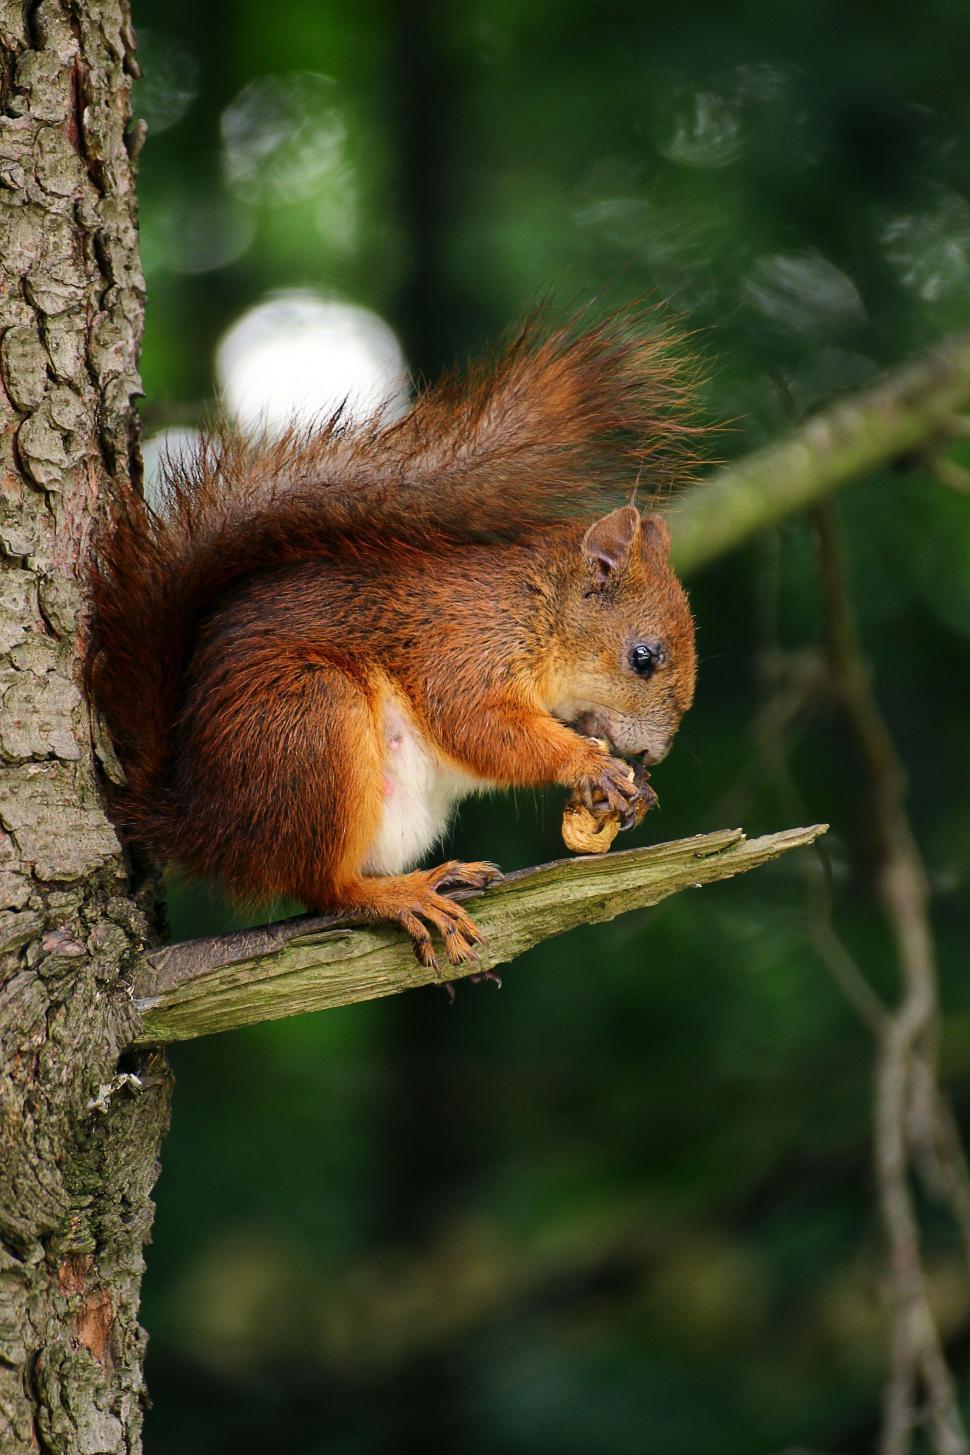 Free Image of A Squirrel Sitting on a Tree Branch 